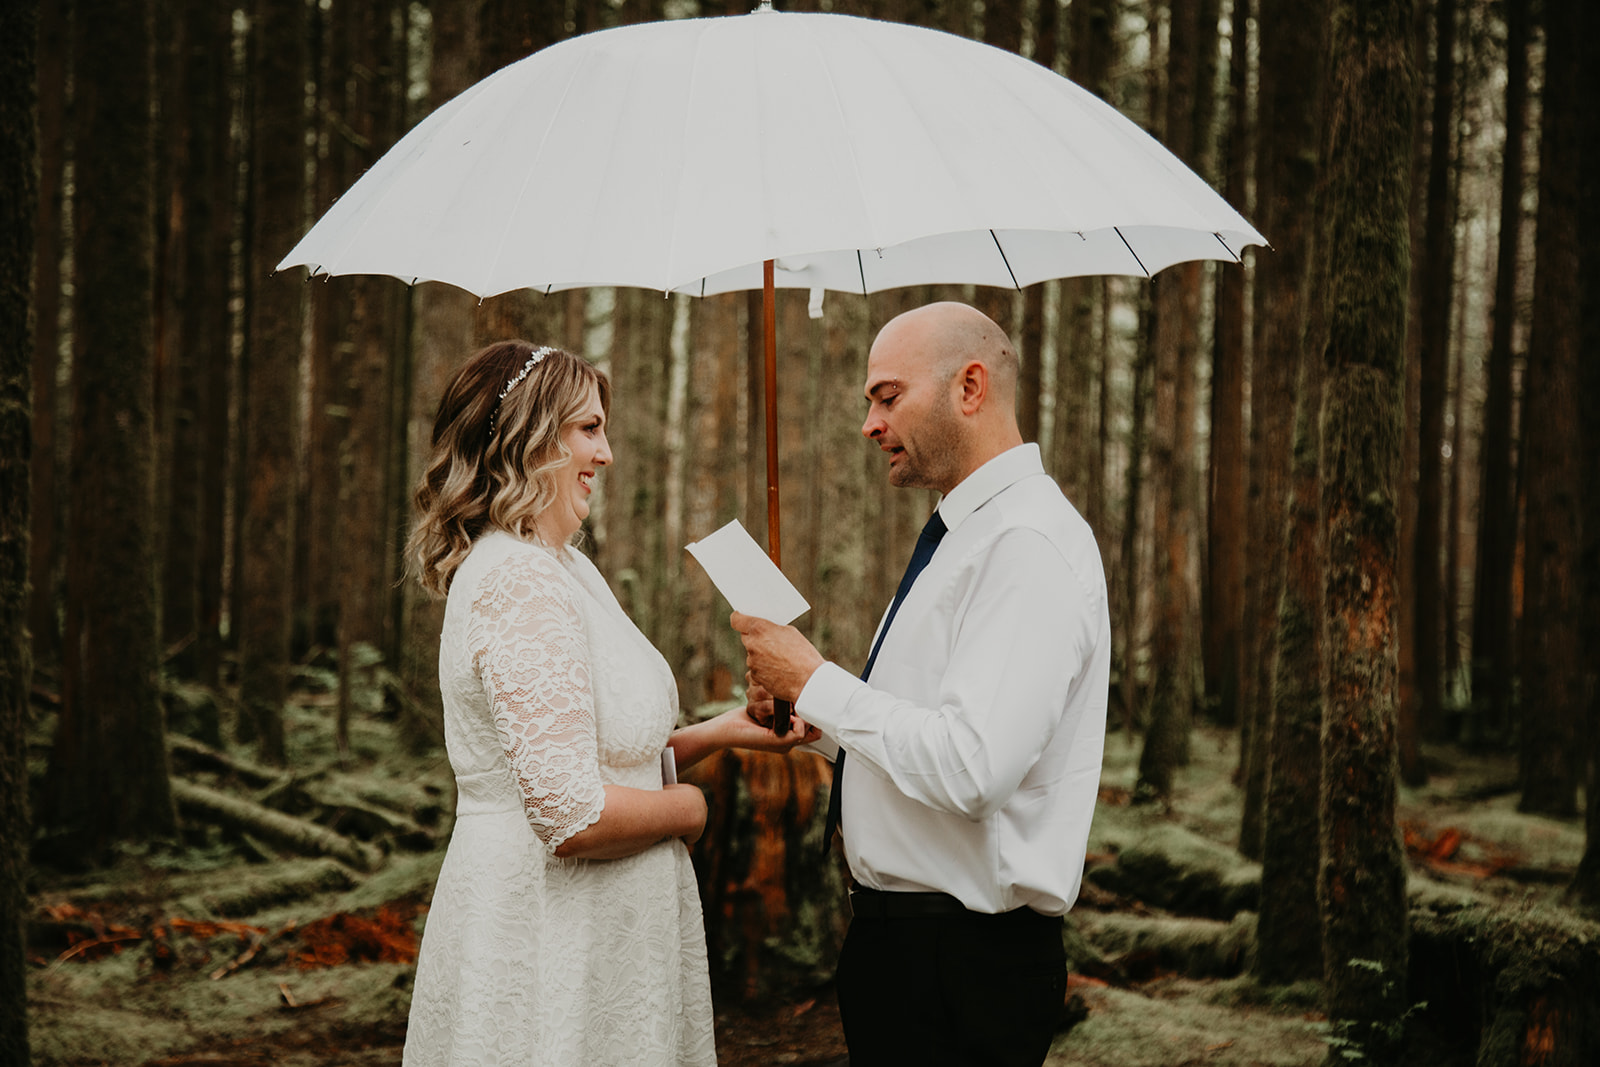 personal wedding vows in stanley park with young hip and married